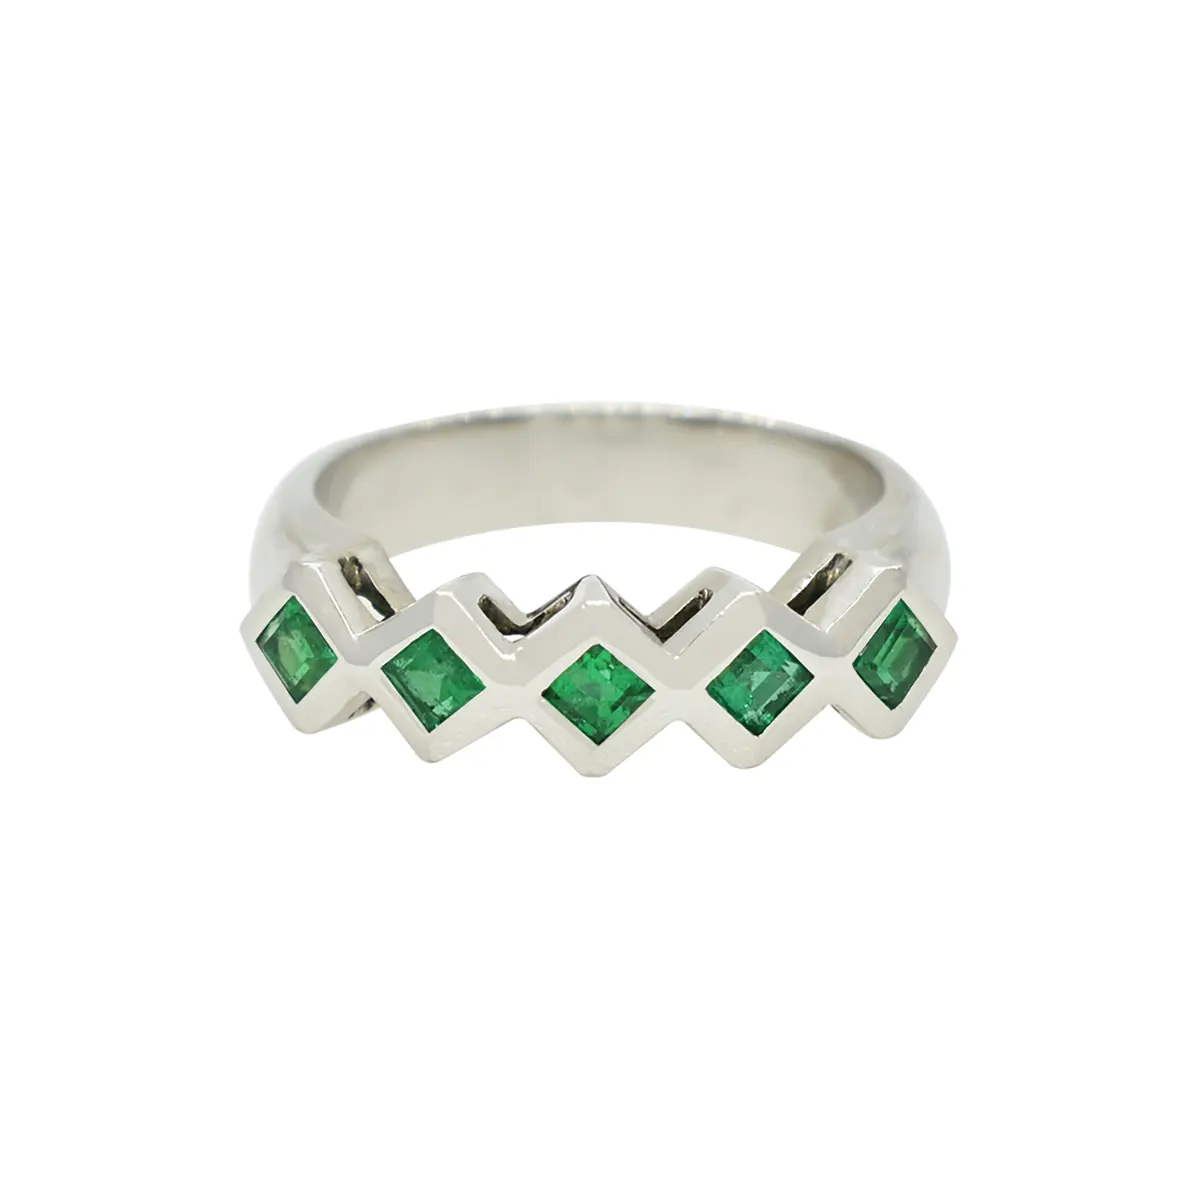 This ring is custom-made and completely handcrafted for this selection of natural emeralds